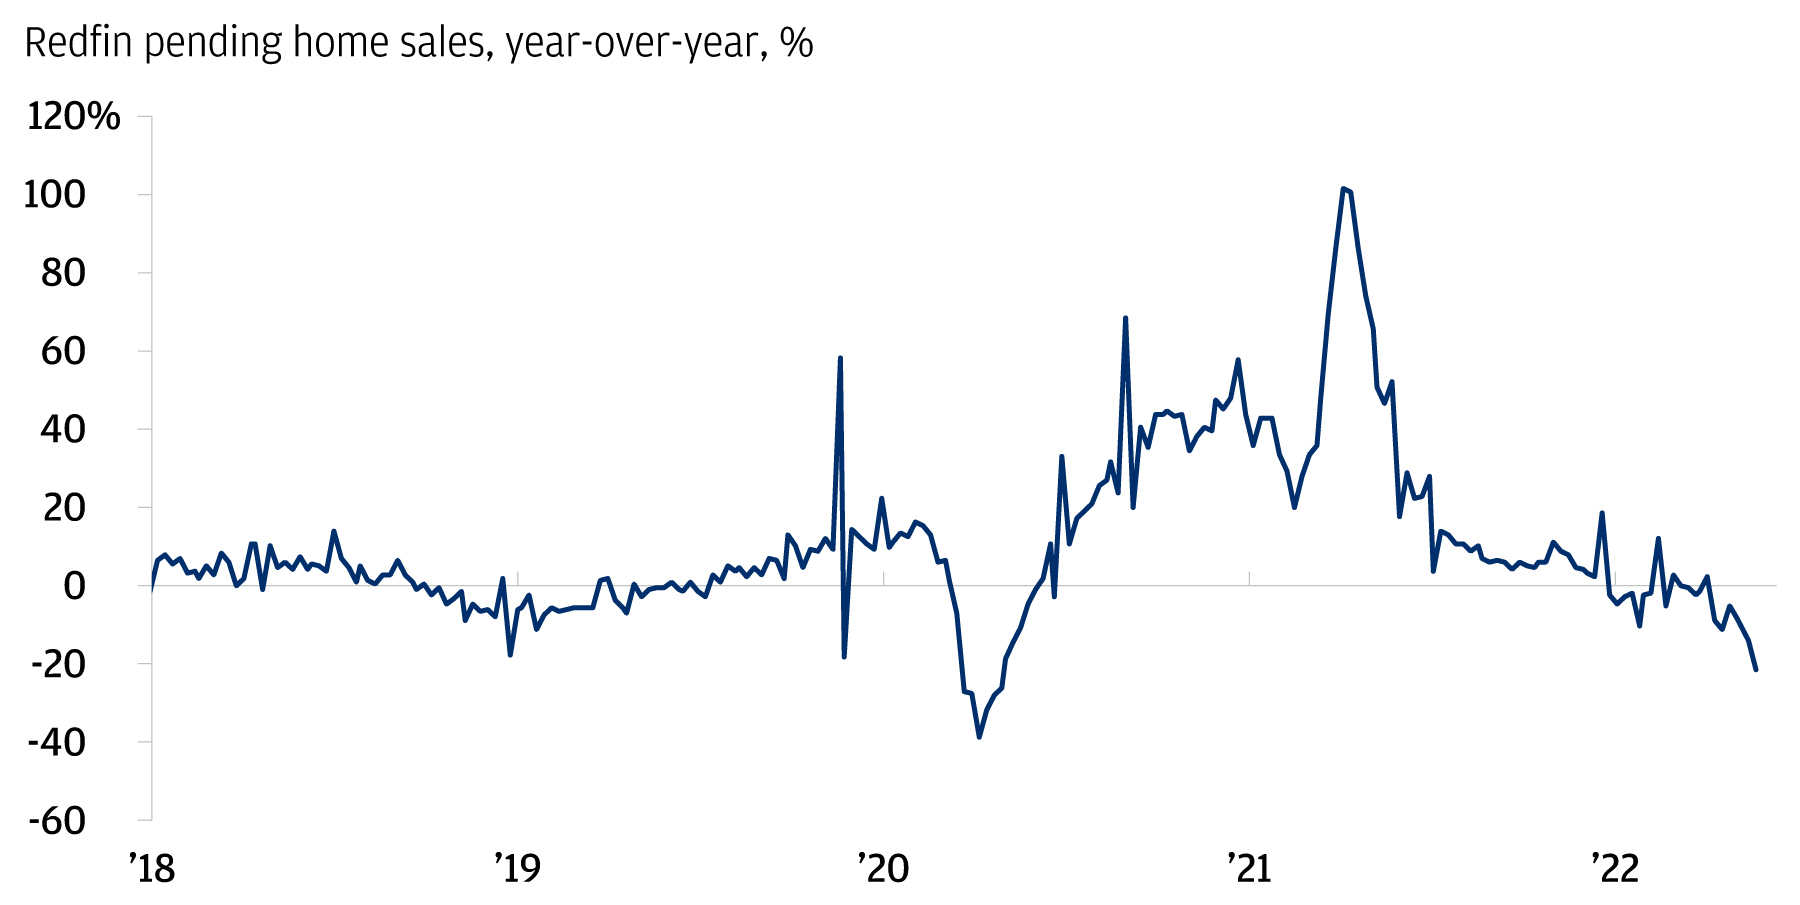 This chart shows the 52-week average and year-over-year change of Redfin home sales from 2018 to May 2022.